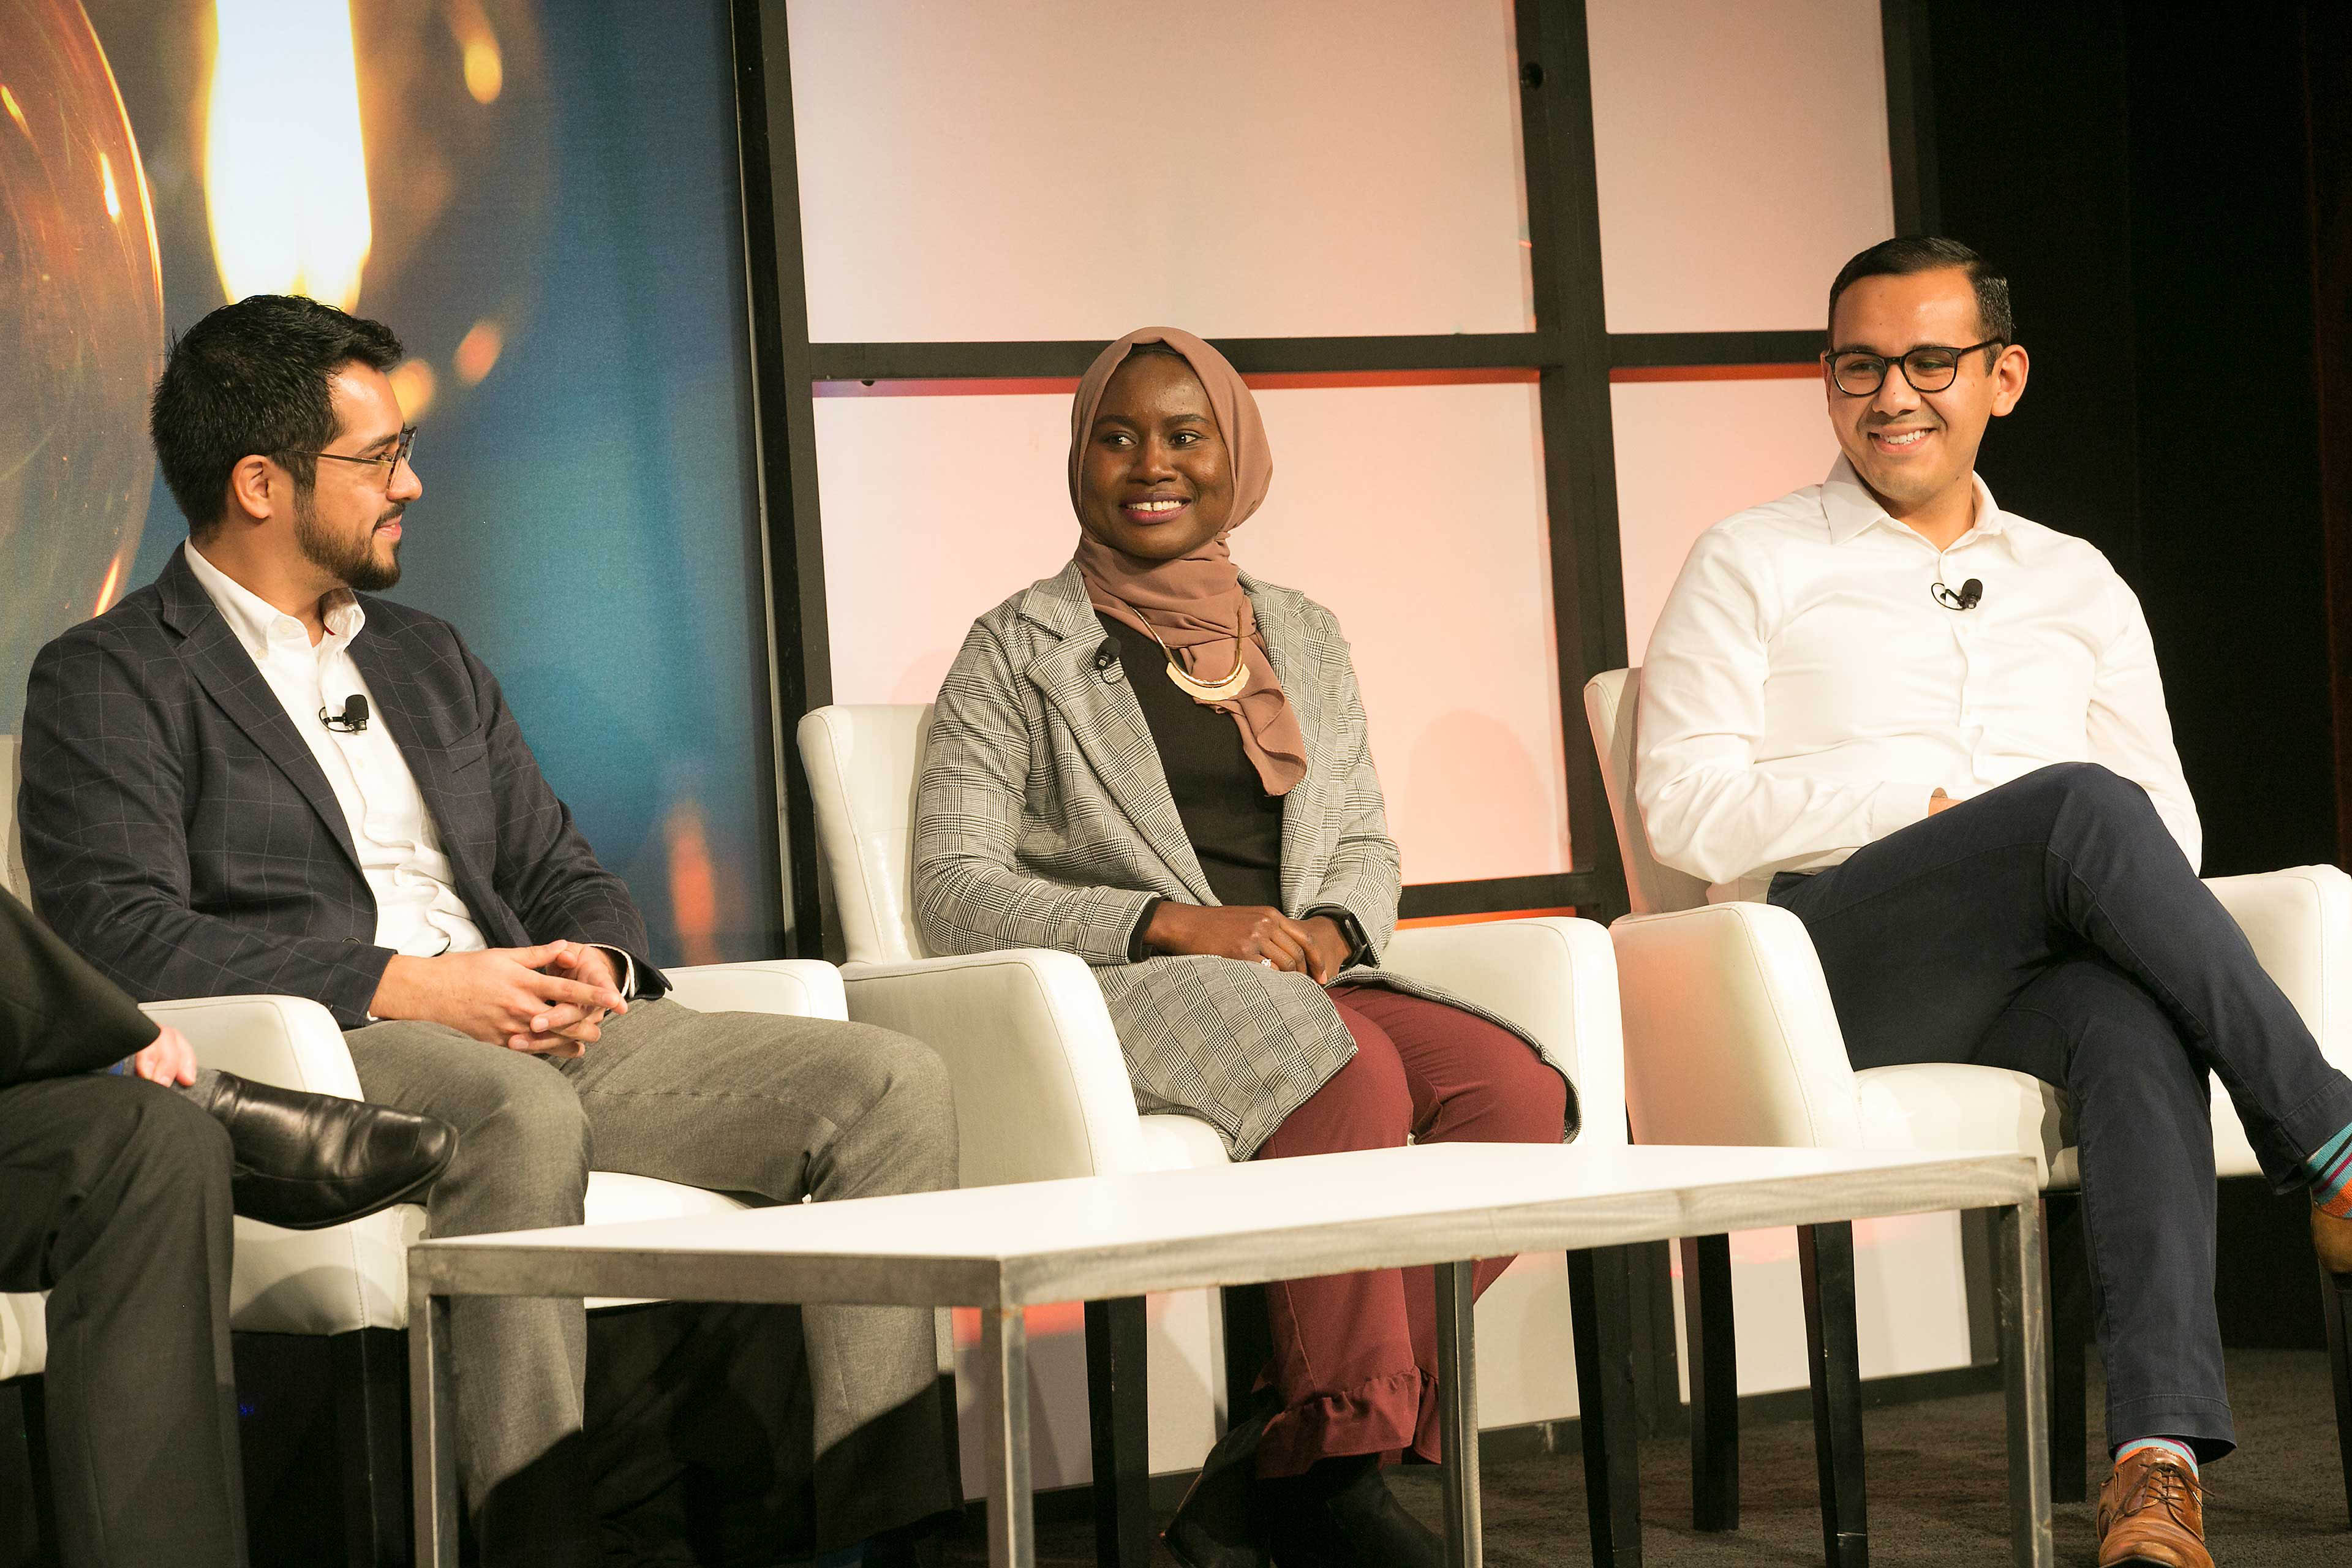 EY professionals Danny, Fatima and Francisco sit on a stage at an EY event.